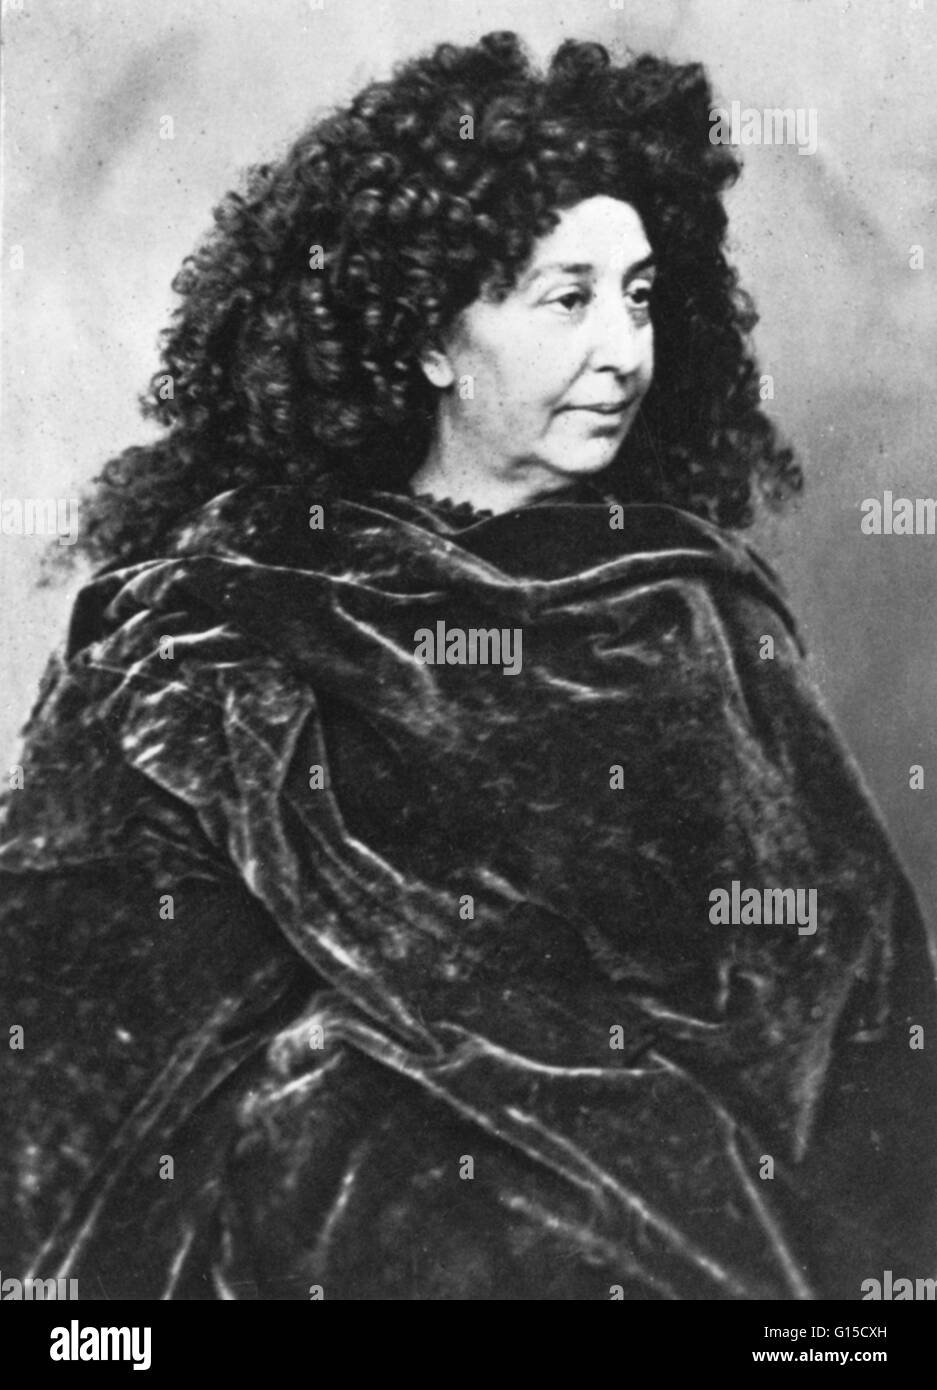 George Sand (1804-1876) was the pseudonym of French novelist and feminist Amantine-Lucile-Aurore Dupin, later Baroness Dudevant. Sand was an amazing author, personality, and all-around woman. She earned as much notoriety for her Bohemian lifestyle as for Stock Photo